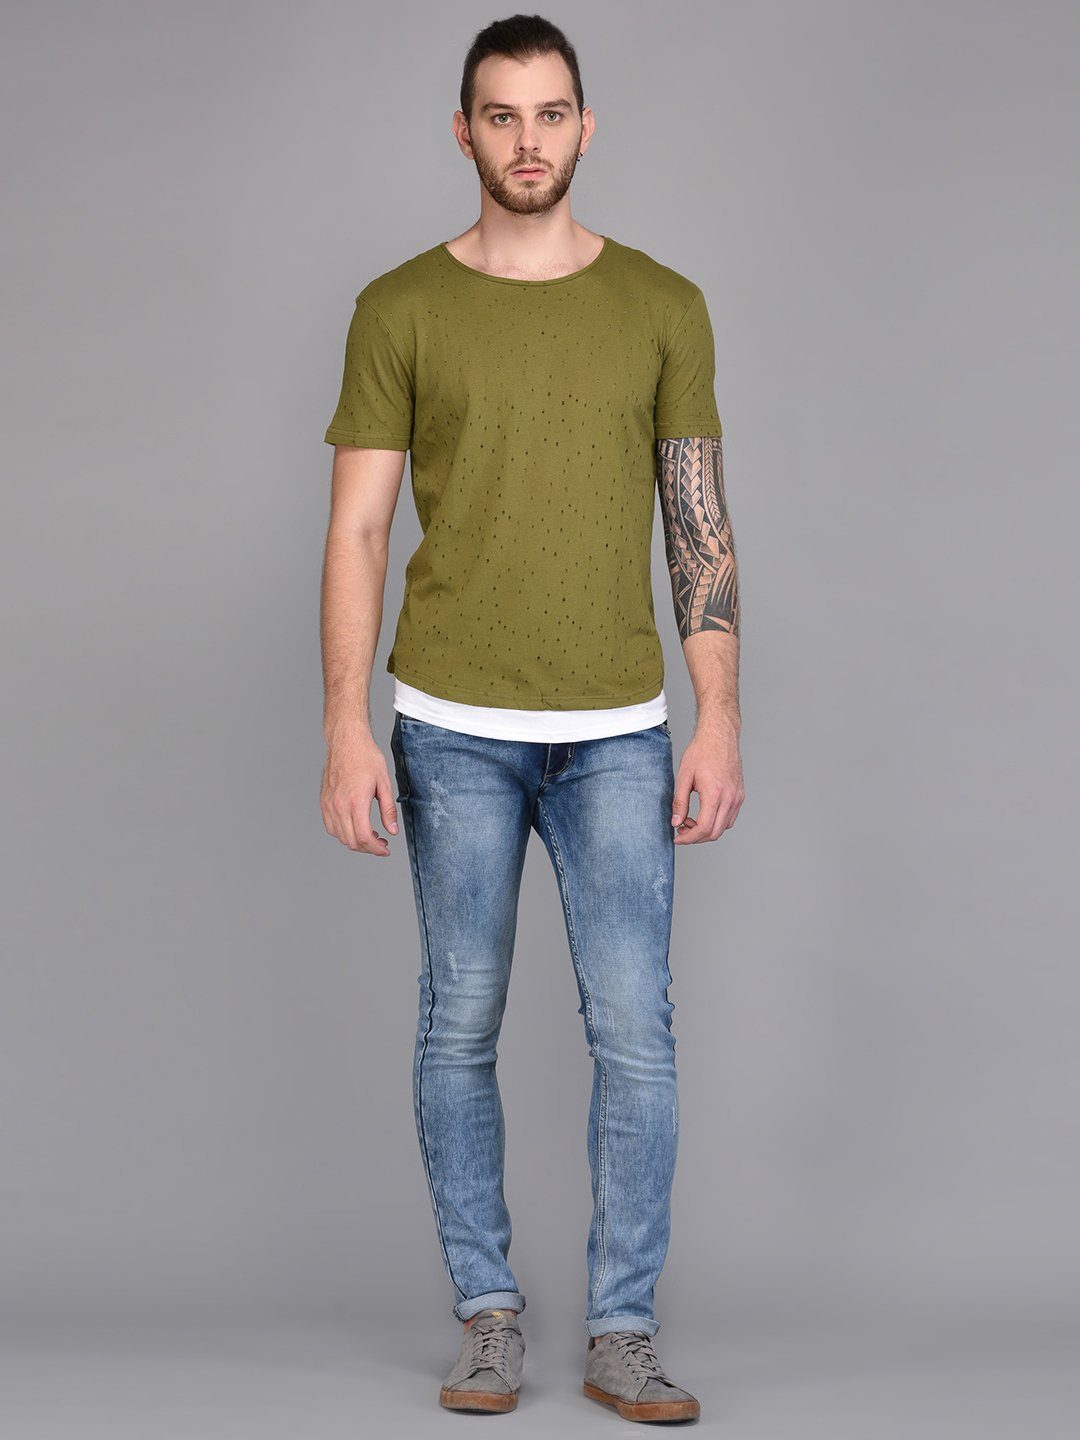 Olive Distressed T-shirt with Contrast Lining